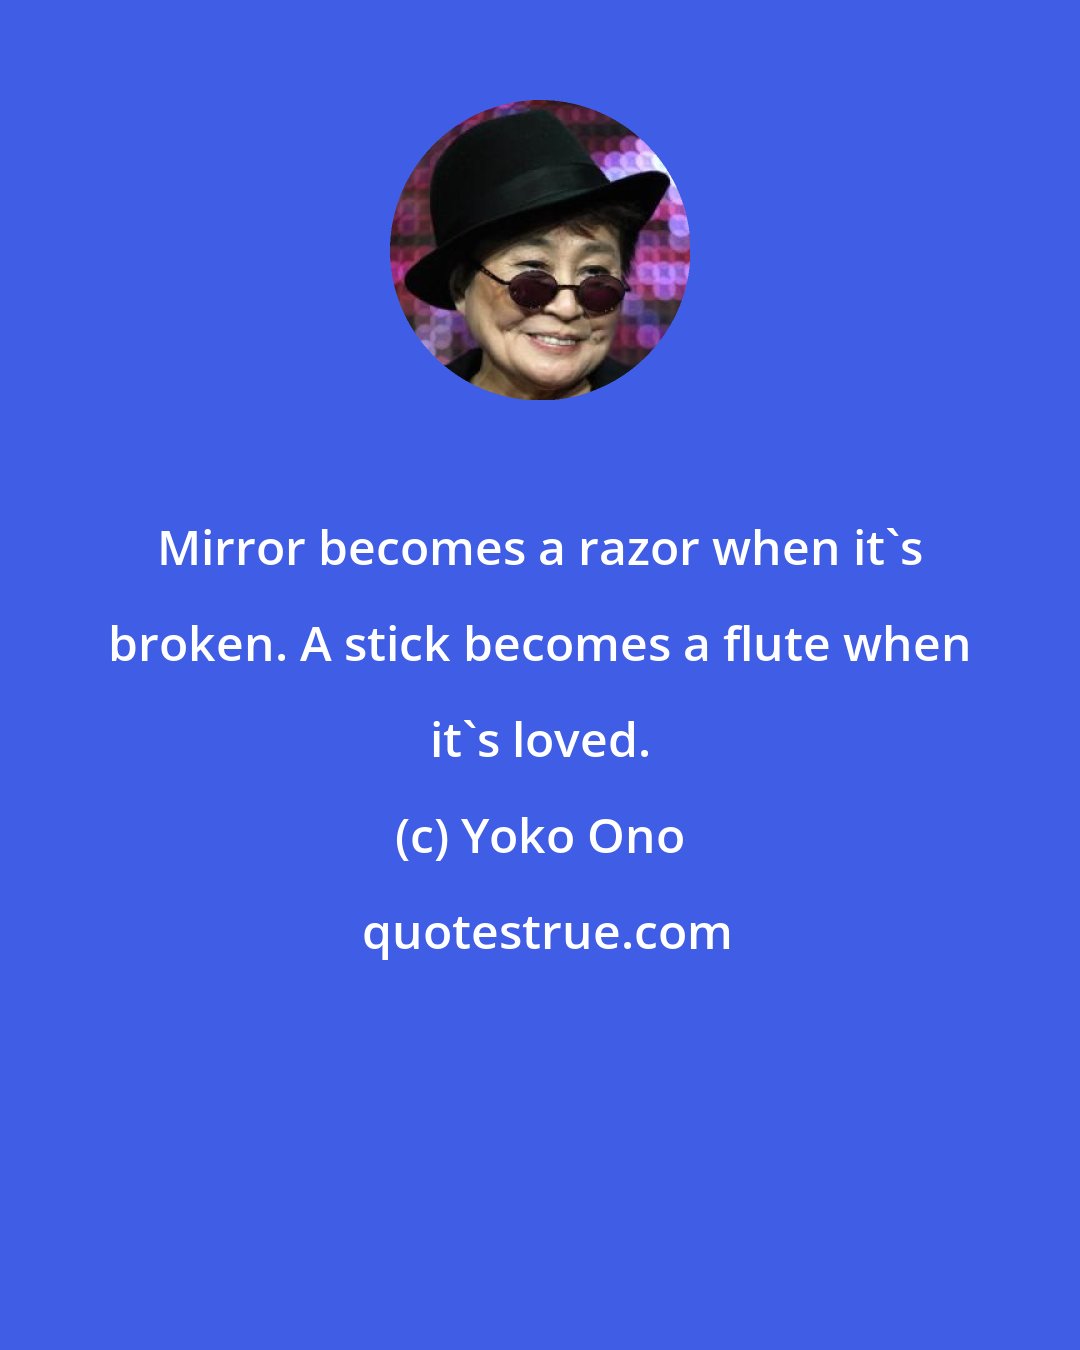 Yoko Ono: Mirror becomes a razor when it's broken. A stick becomes a flute when it's loved.